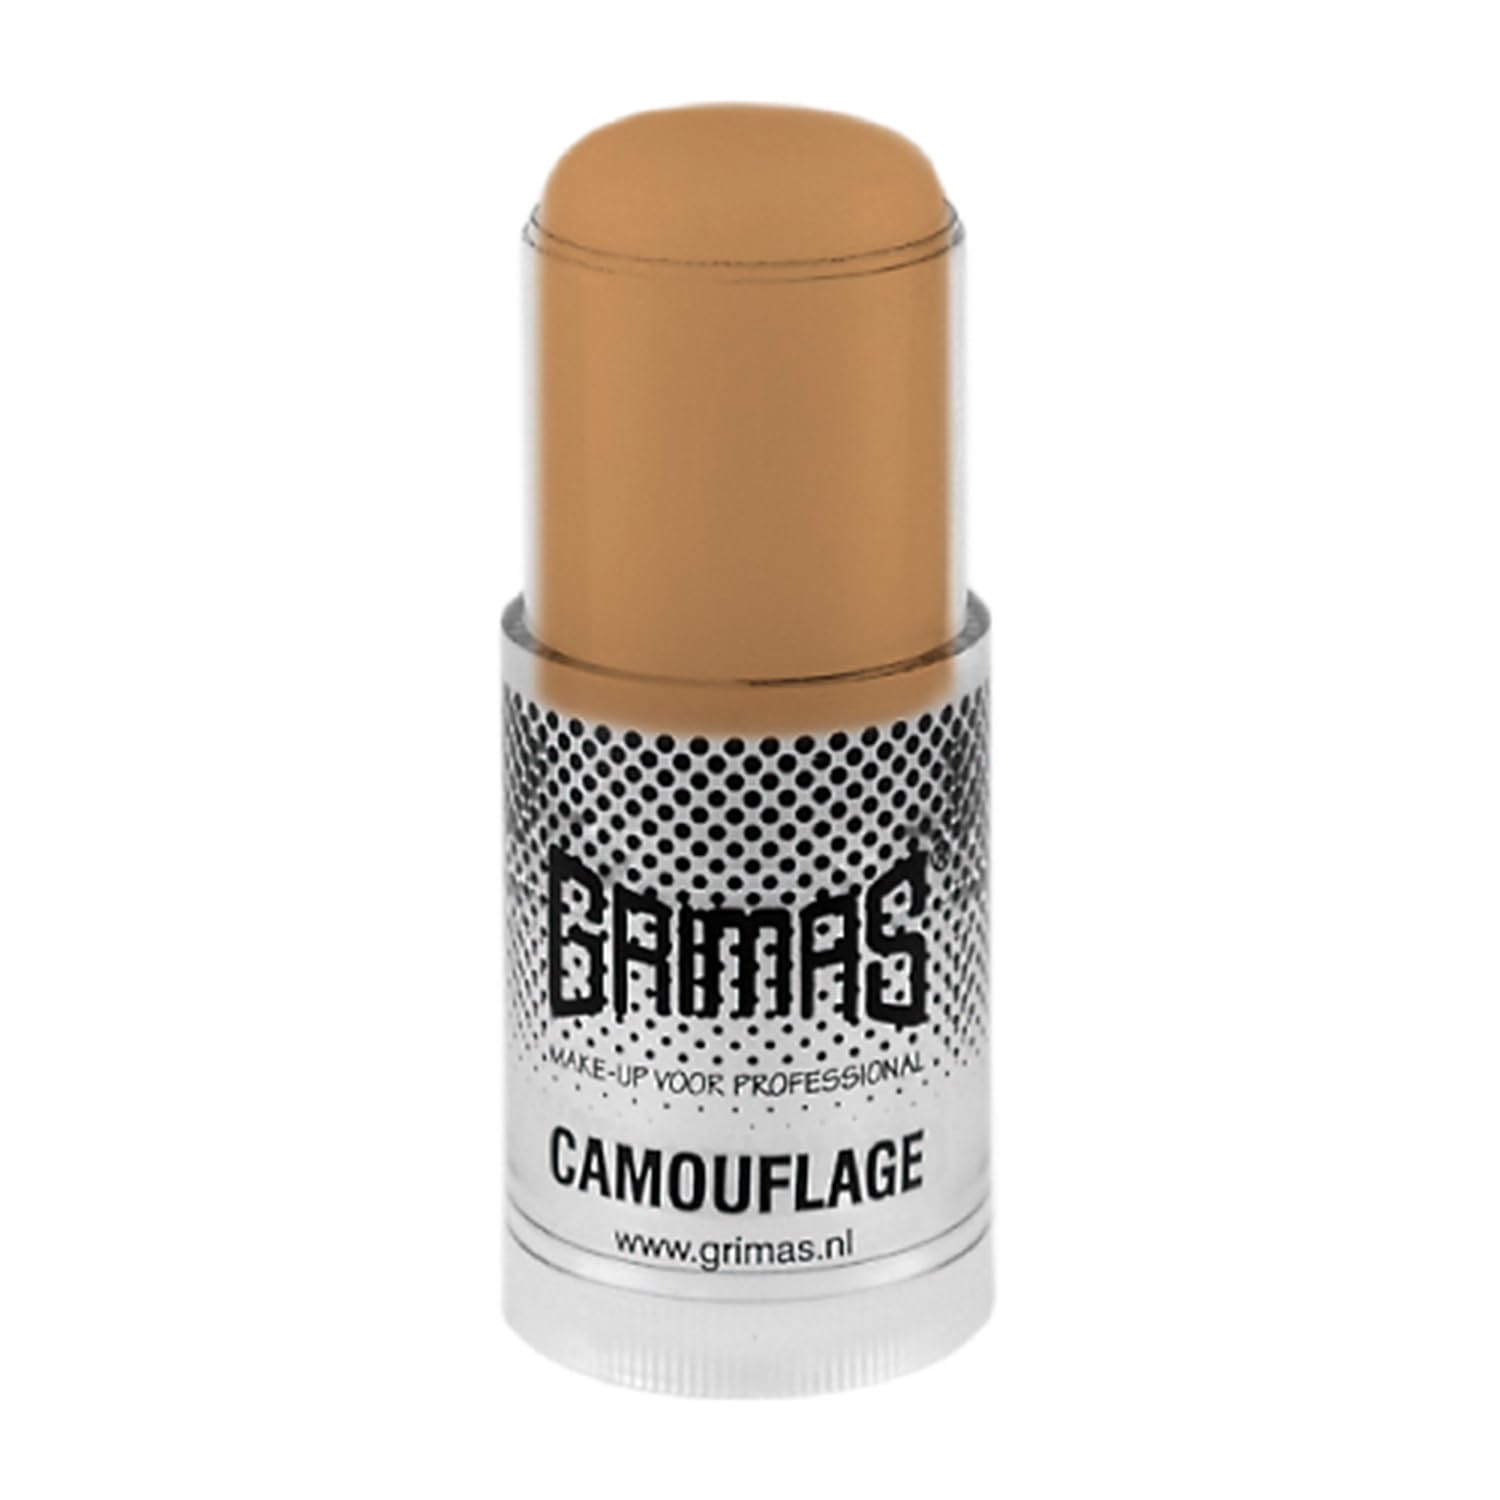 GRIMAS Professional Concealer Camouflage Stick, 23 ml, Skin Colour B3, Professional High Coverage and Concealing Makeup for Tattoos, Fire Paints, Dark Circles, Pigment Spots and Much More